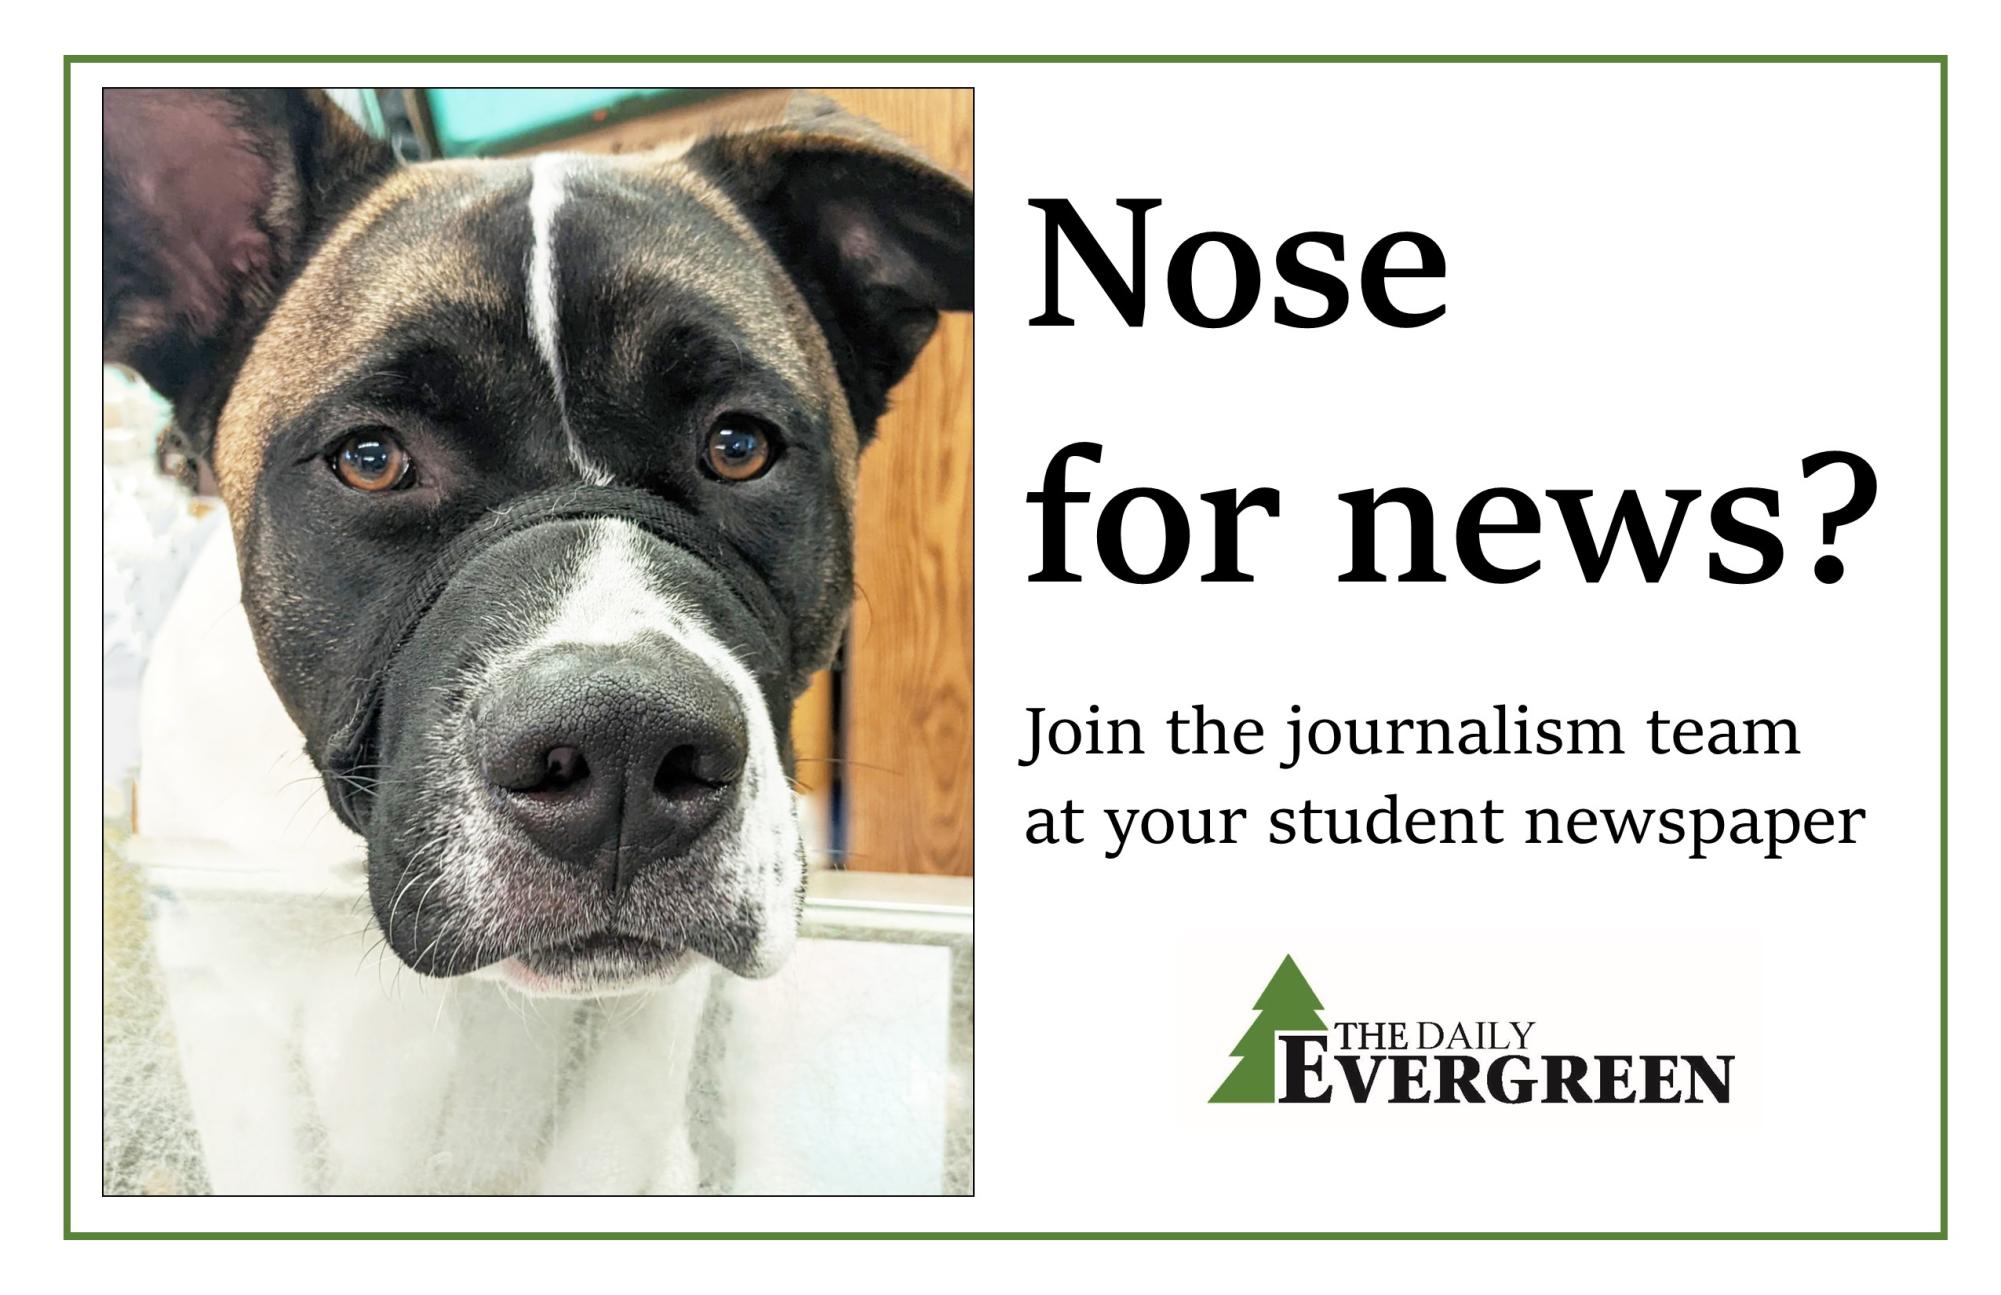 Work at The Daily Evergreen ad